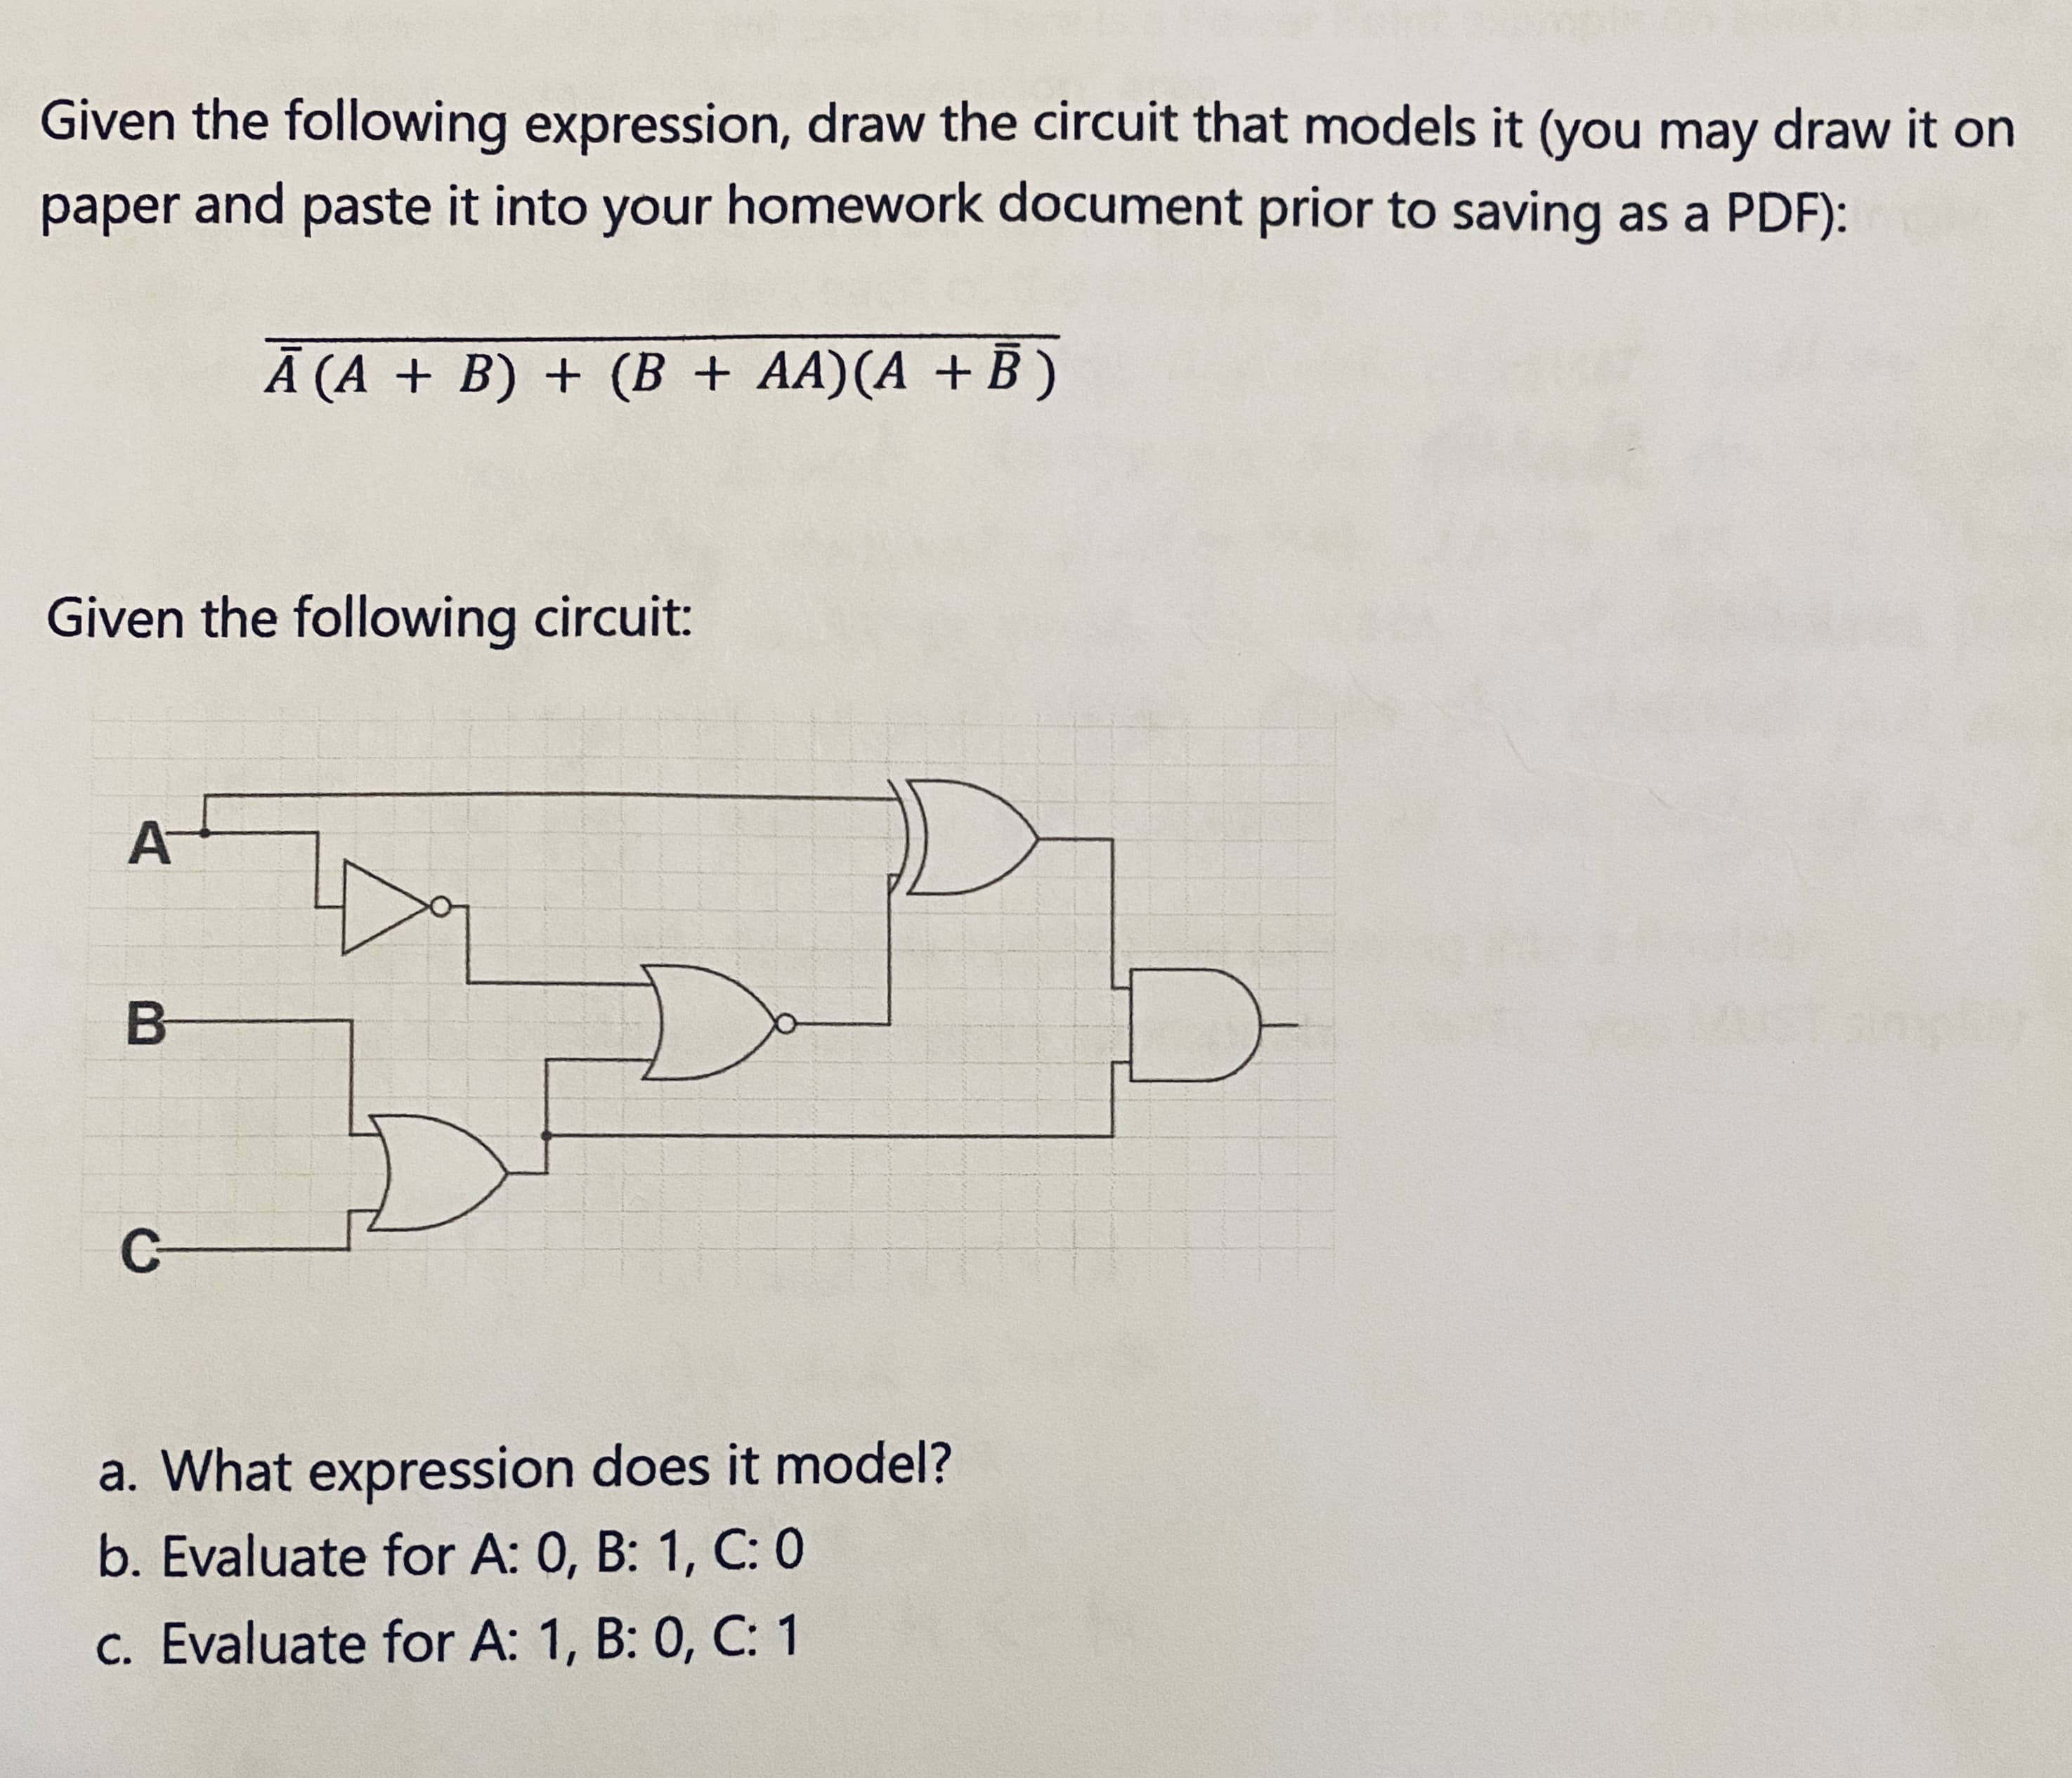 Given the following expression, draw the circuit that models it (you may draw it on
paper and paste it into your homework document prior to saving as a PDF):
Ā (A + B) + (B + AA)(A + B)
